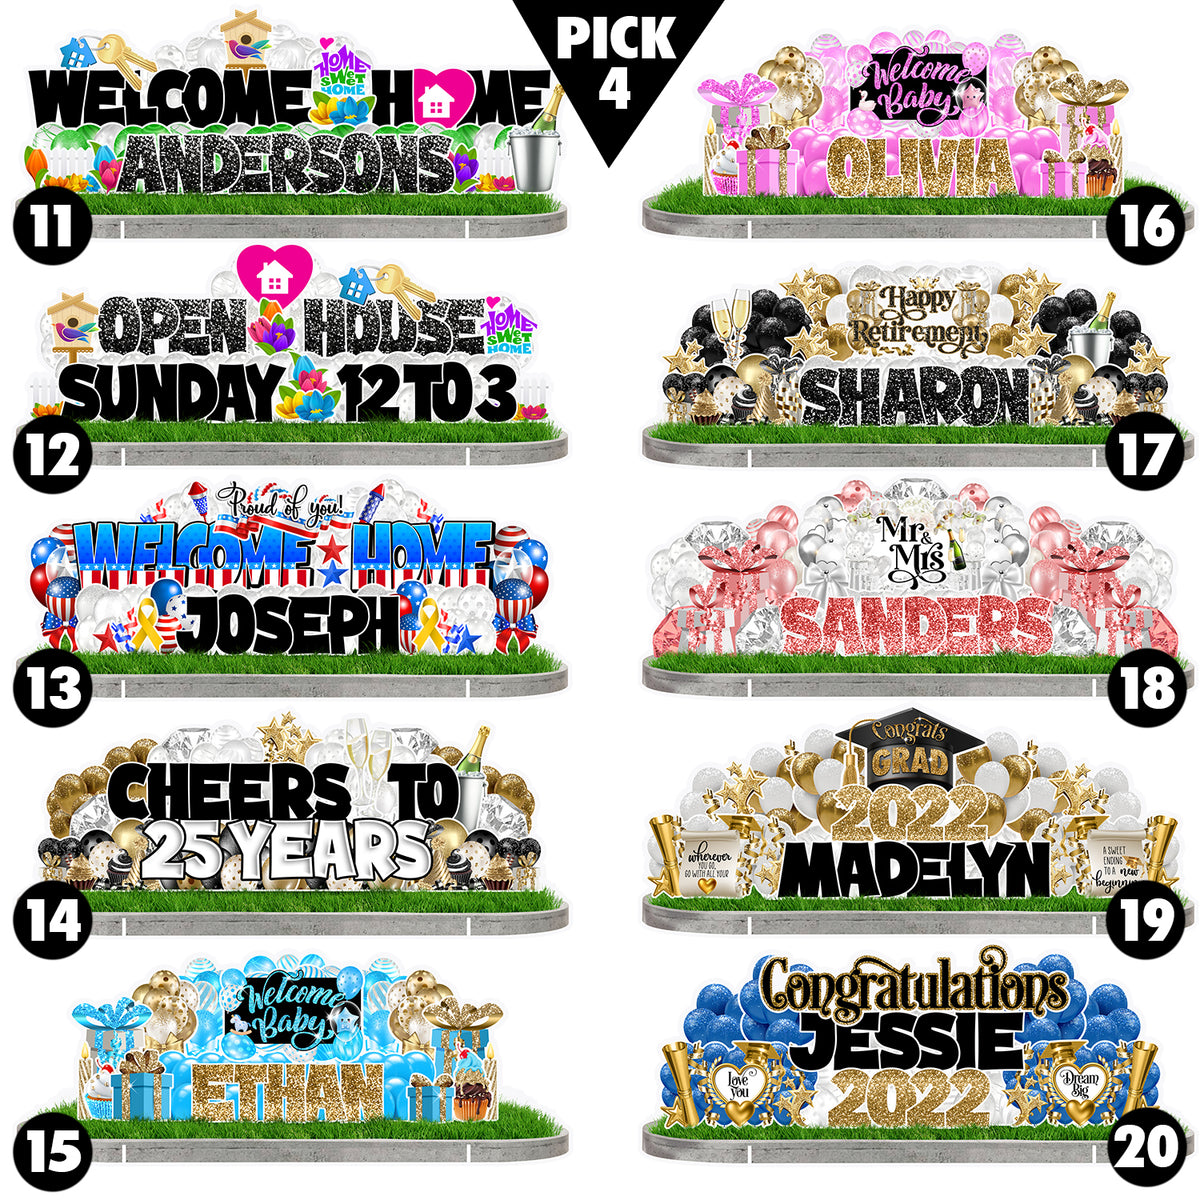 Pick 4 - Yard Card Trade Show Table Toppers With House